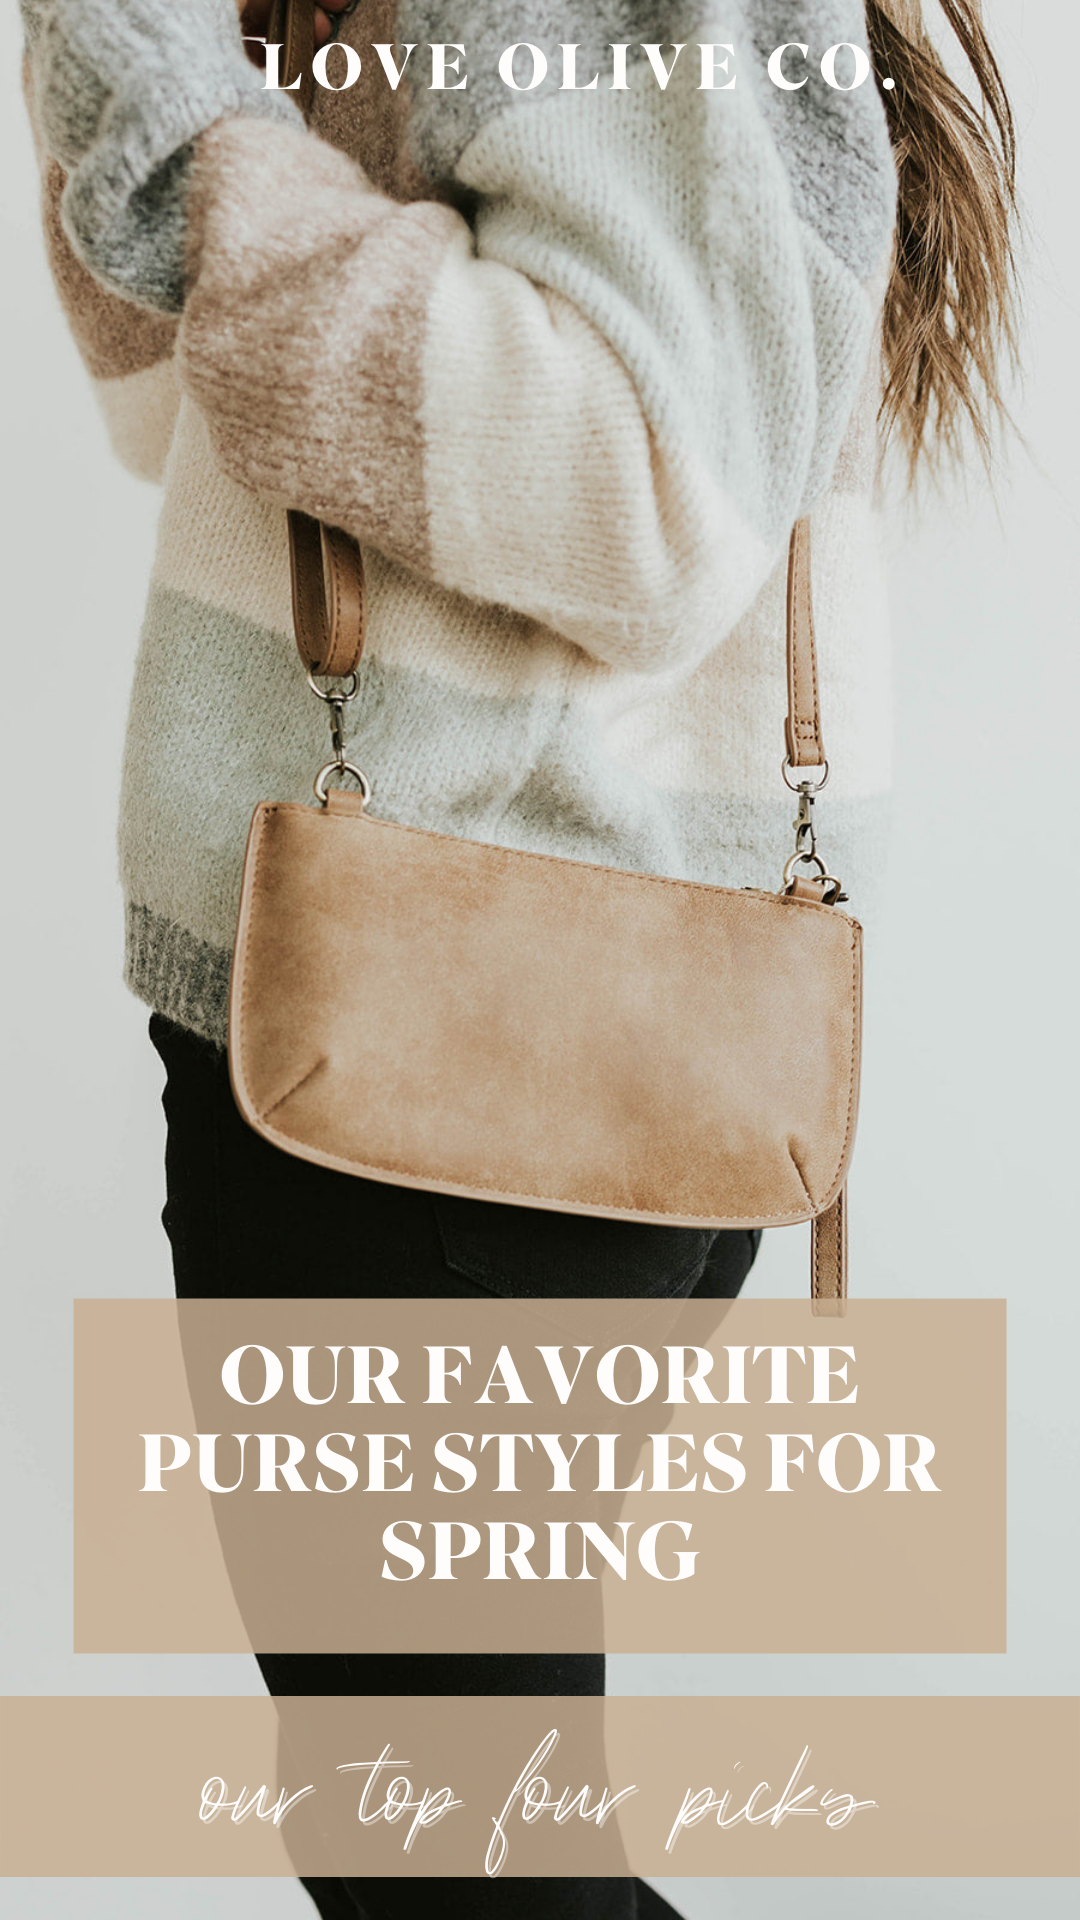 our favorite purse styles for spring. www.loveoliveco.com